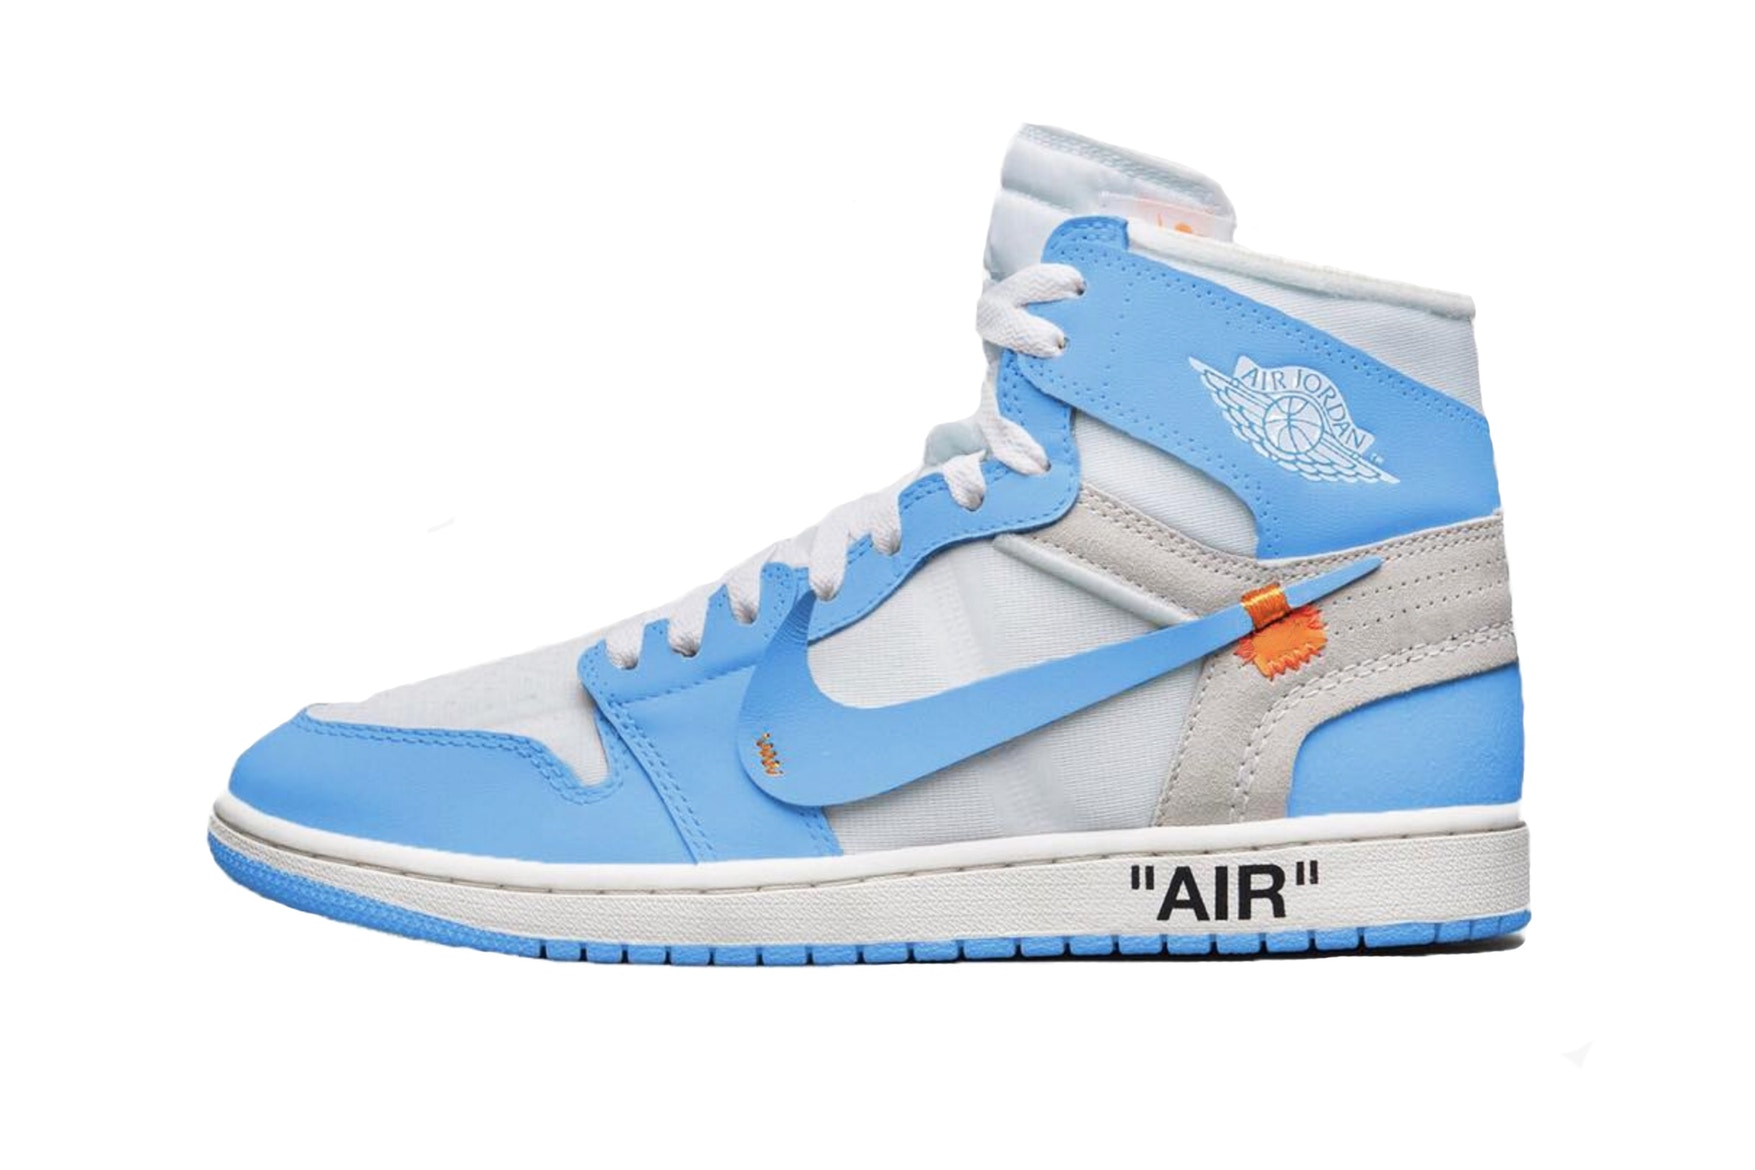 The Virgil Abloh x Air Jordan 1 “UNC” Colorway Now has a Possible Release Date and Price